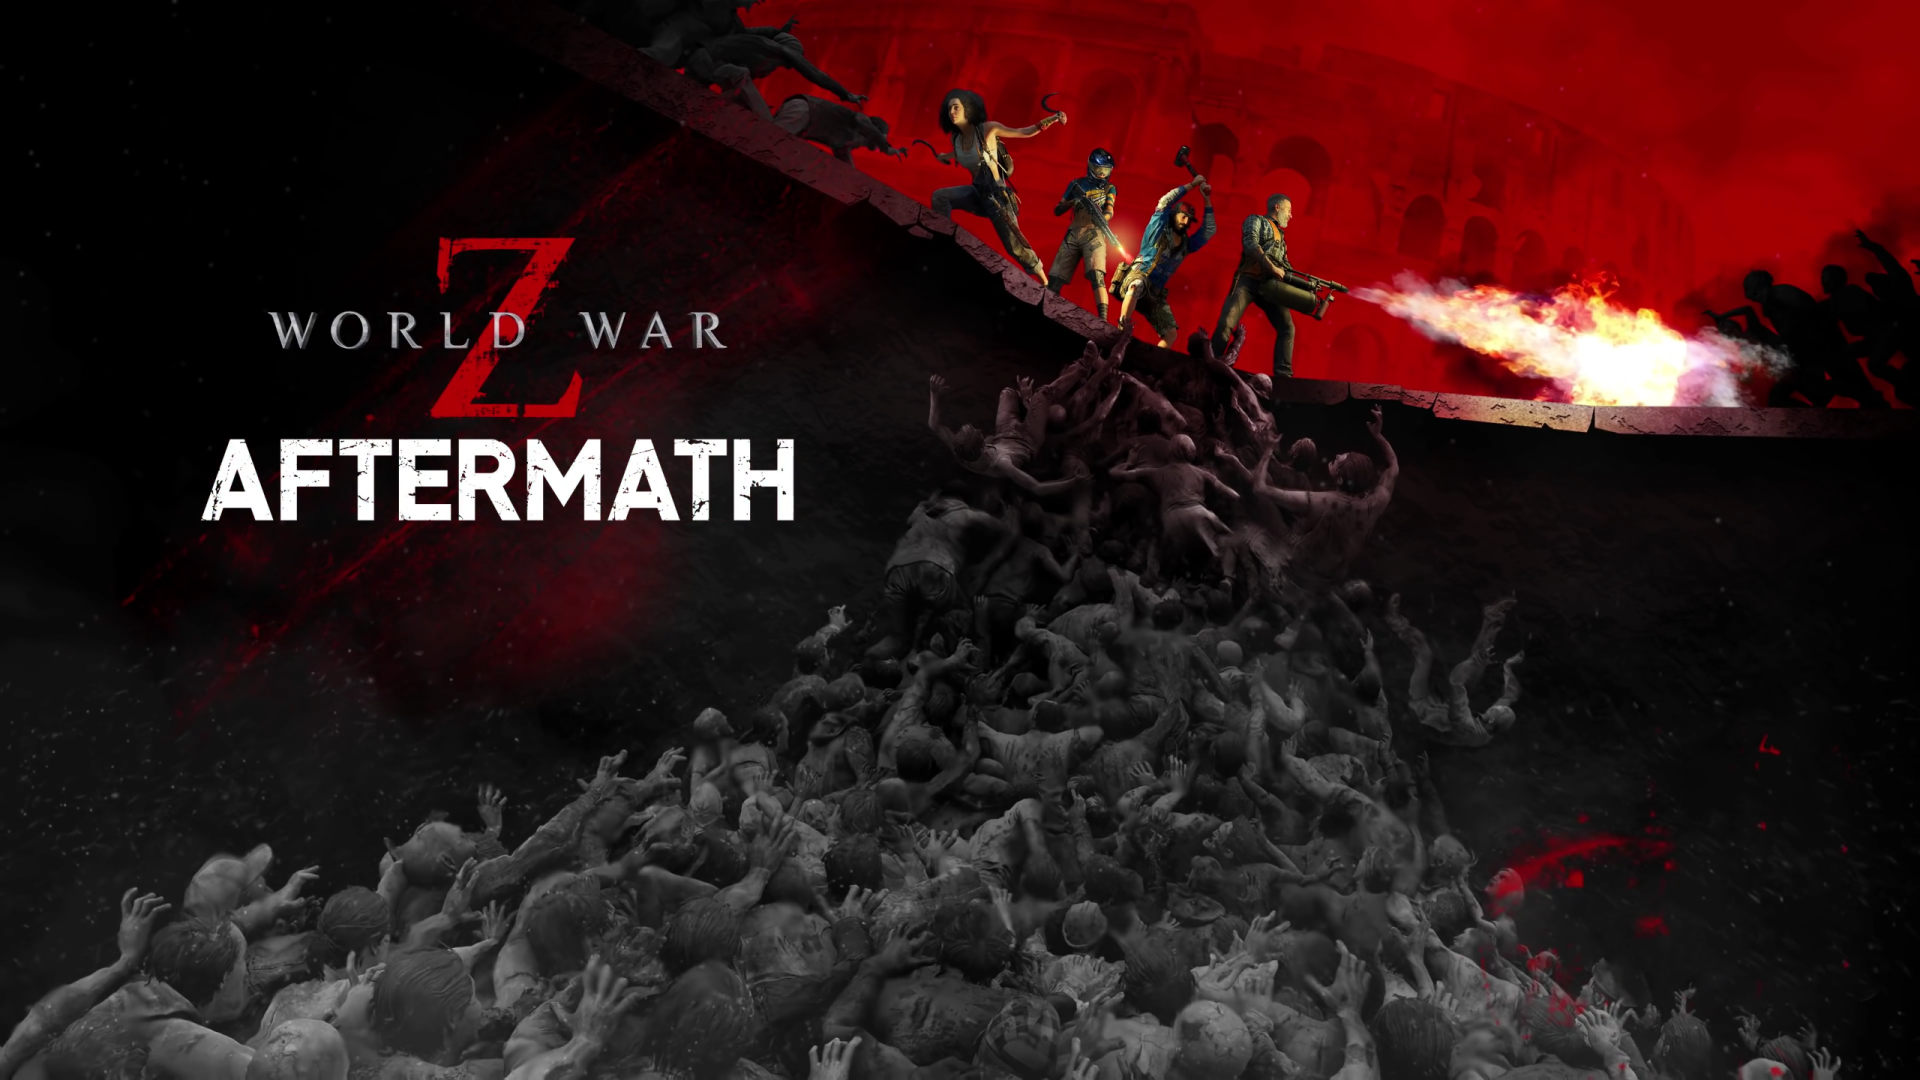 World War Z Aftermath HD Wallpaper And Background